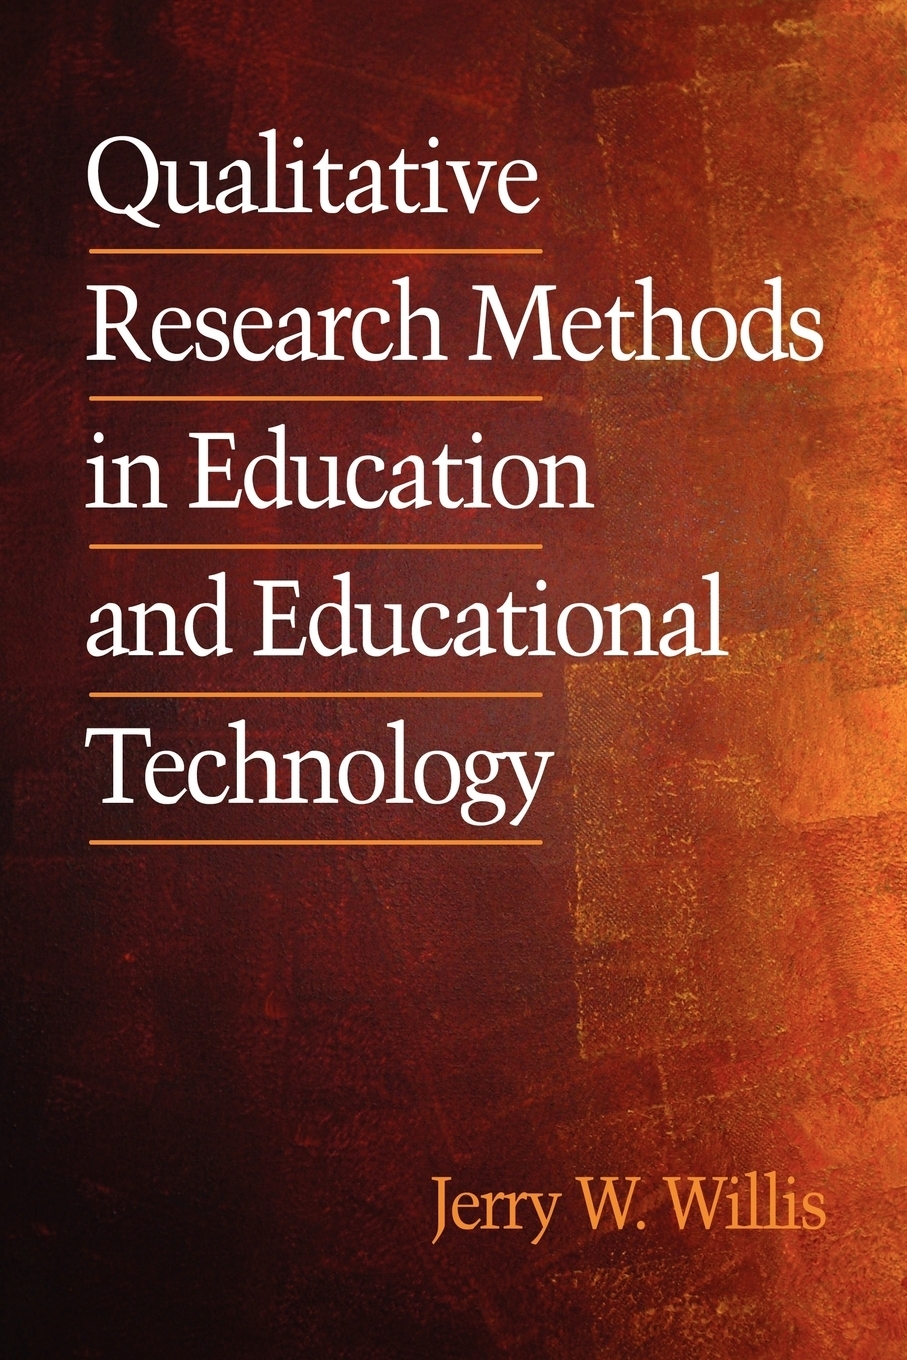 фото Qualitative Research Methods in Education and Educational Technology (PB)